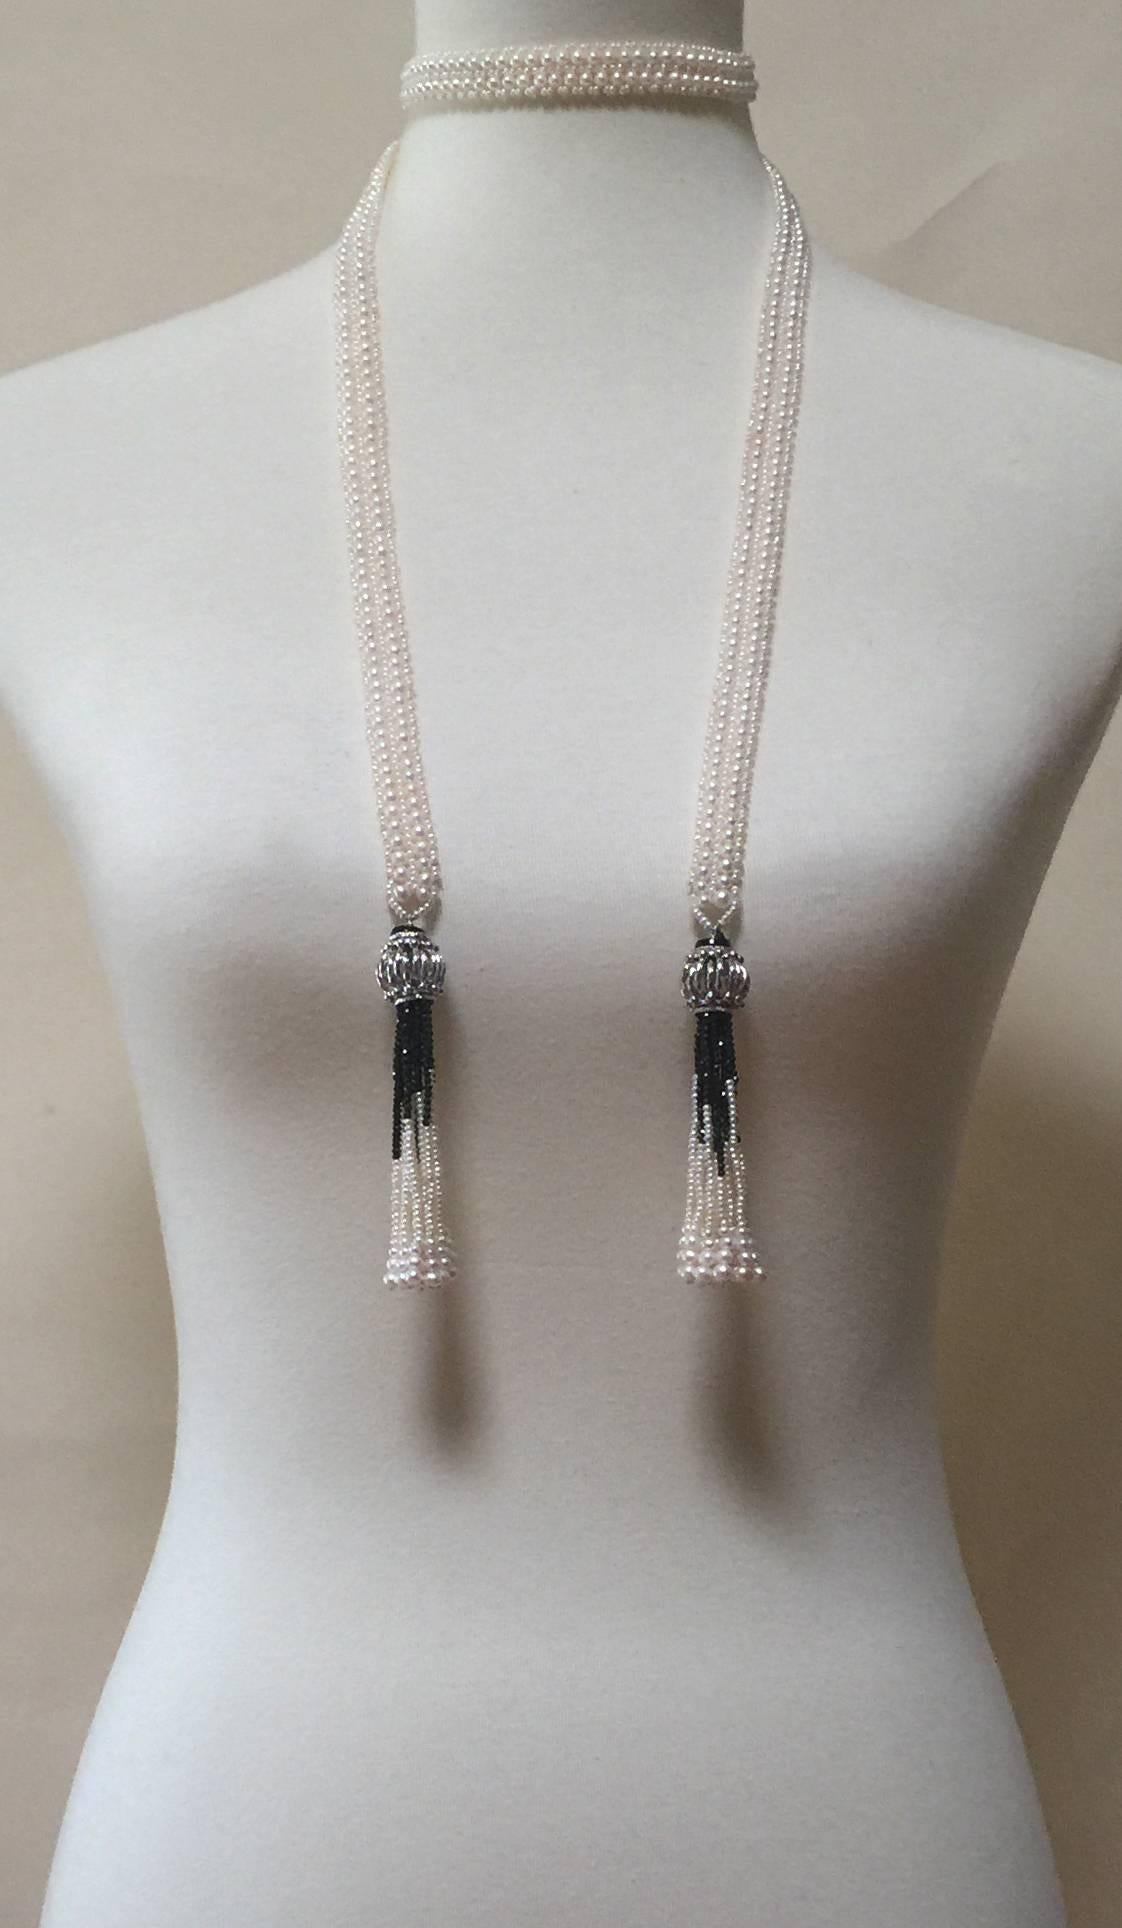 Women's Double Strand Pearl Sautoir with Onyx and Pearl Tassels by Marina J